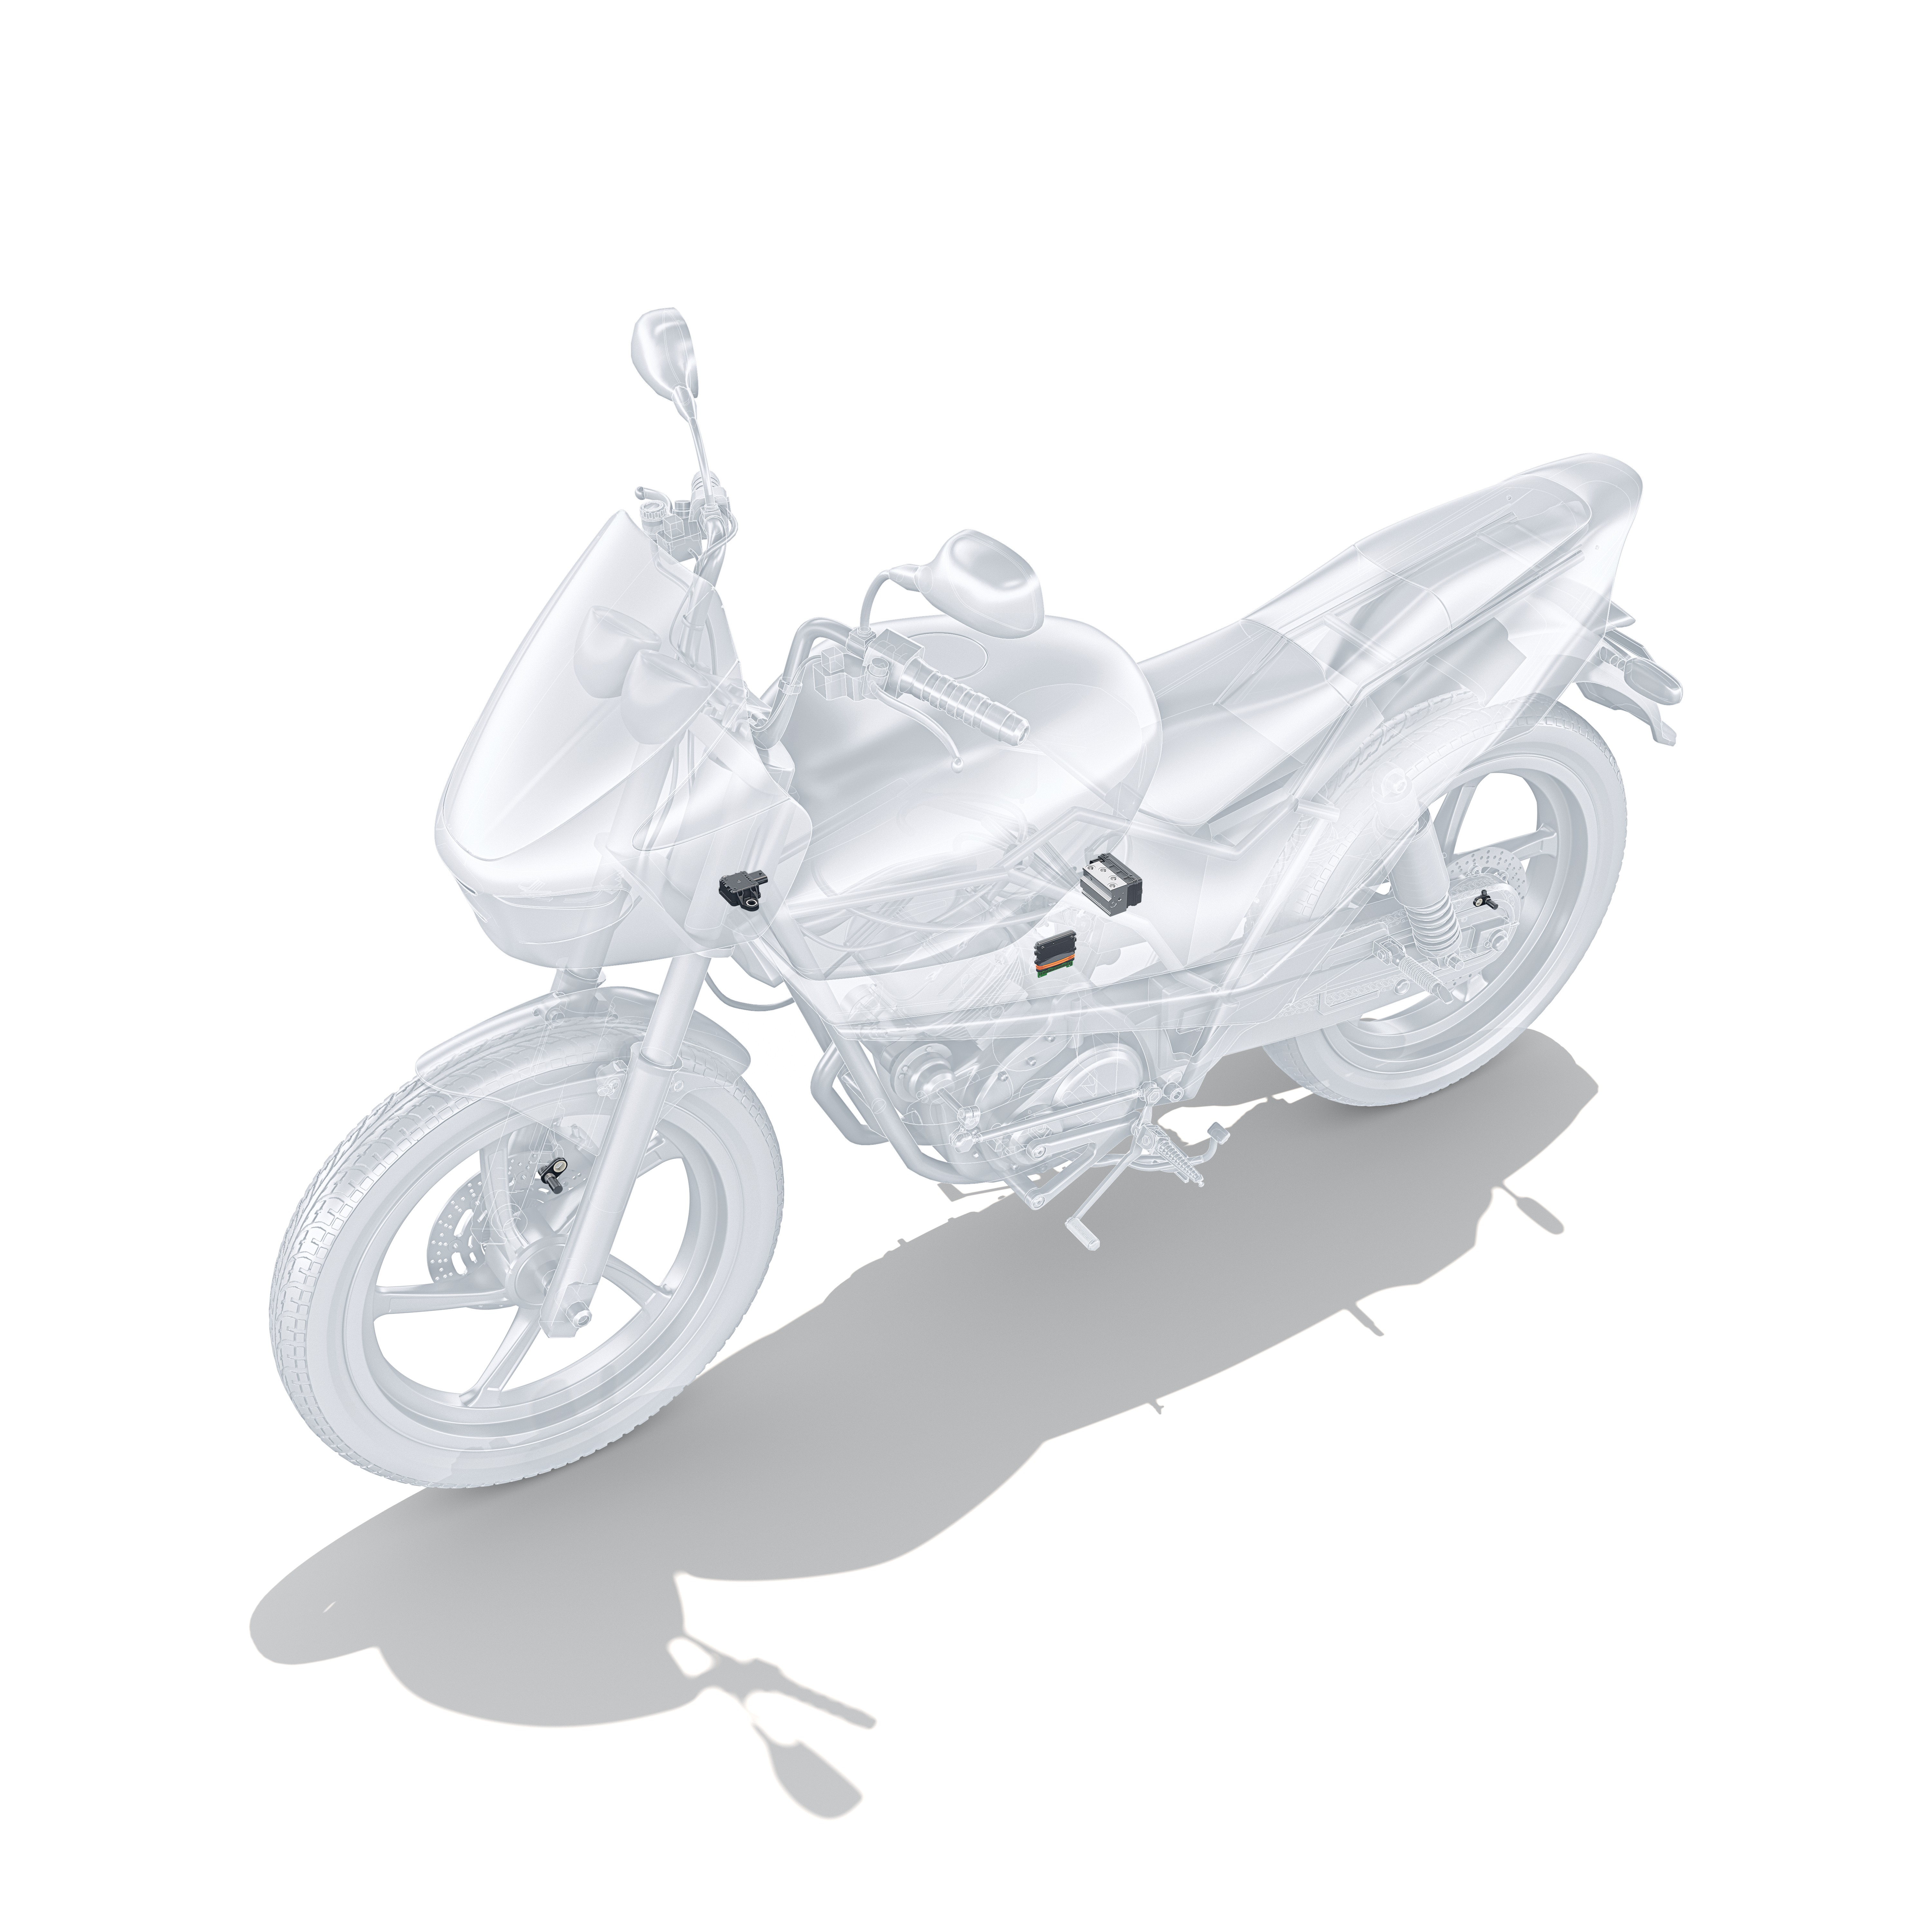 Bosch Motorcycle Stability Control 